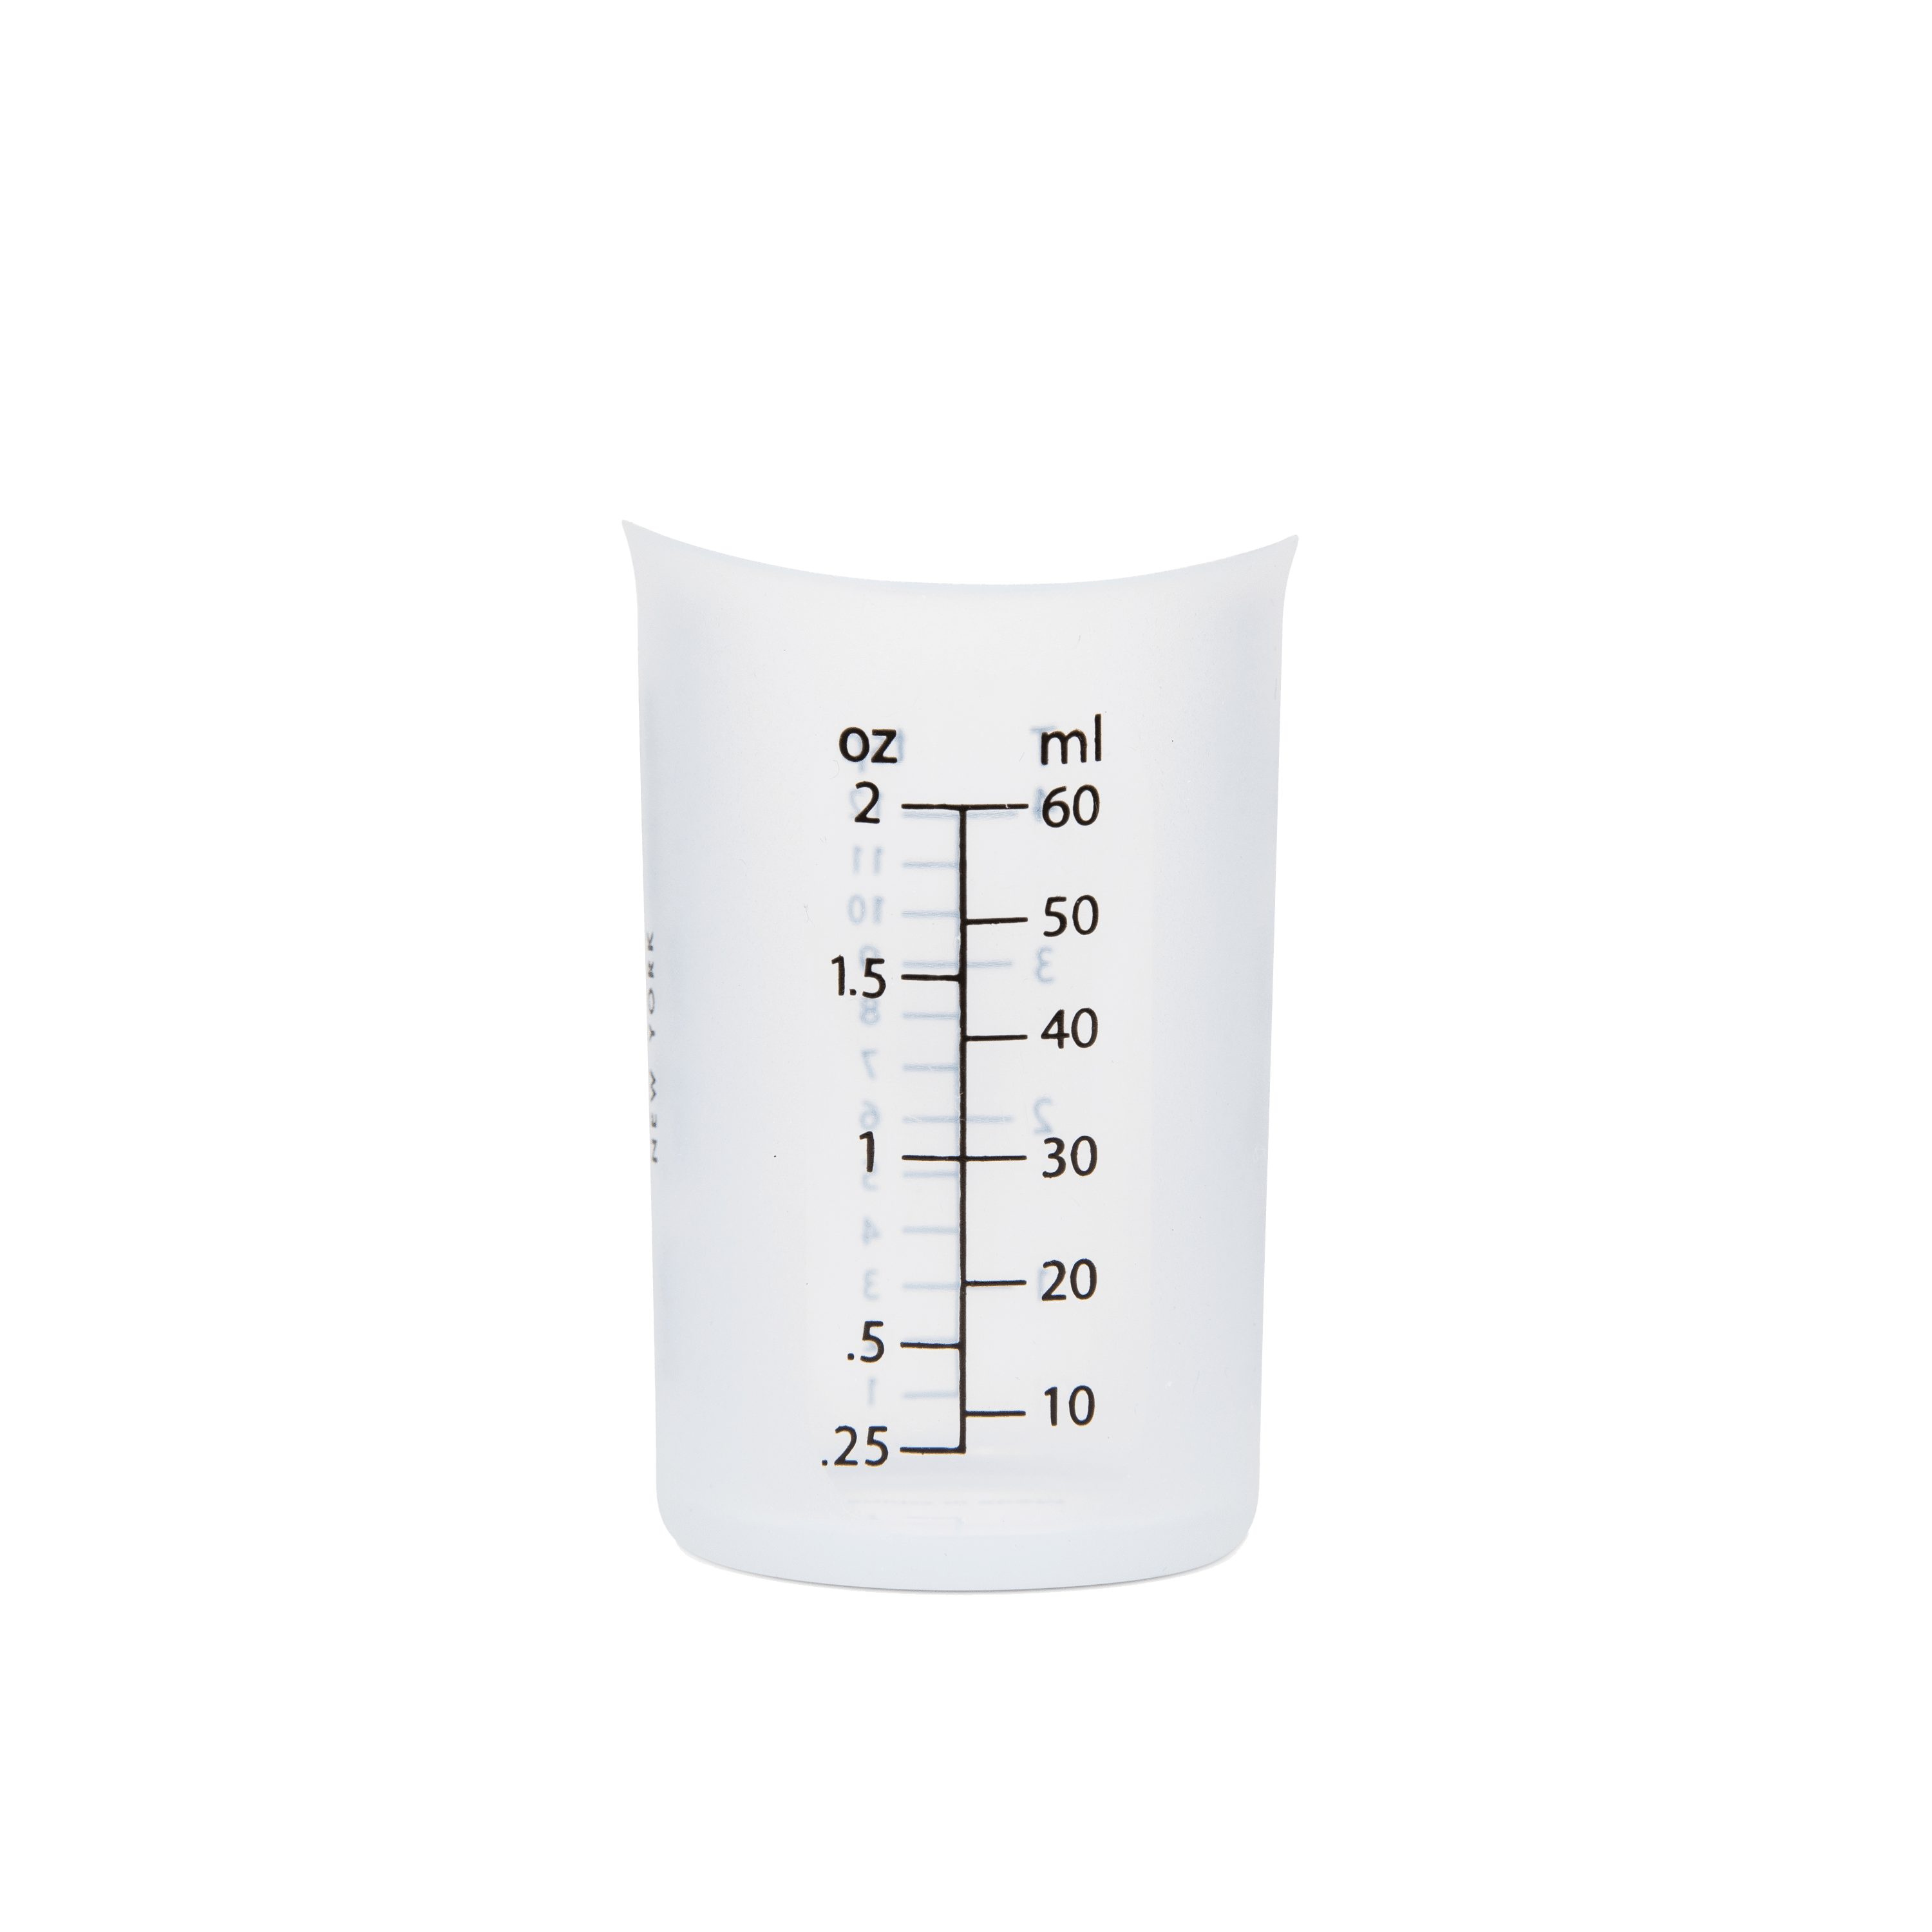 Need cup to measure liquid laundry detergent in milliliters of